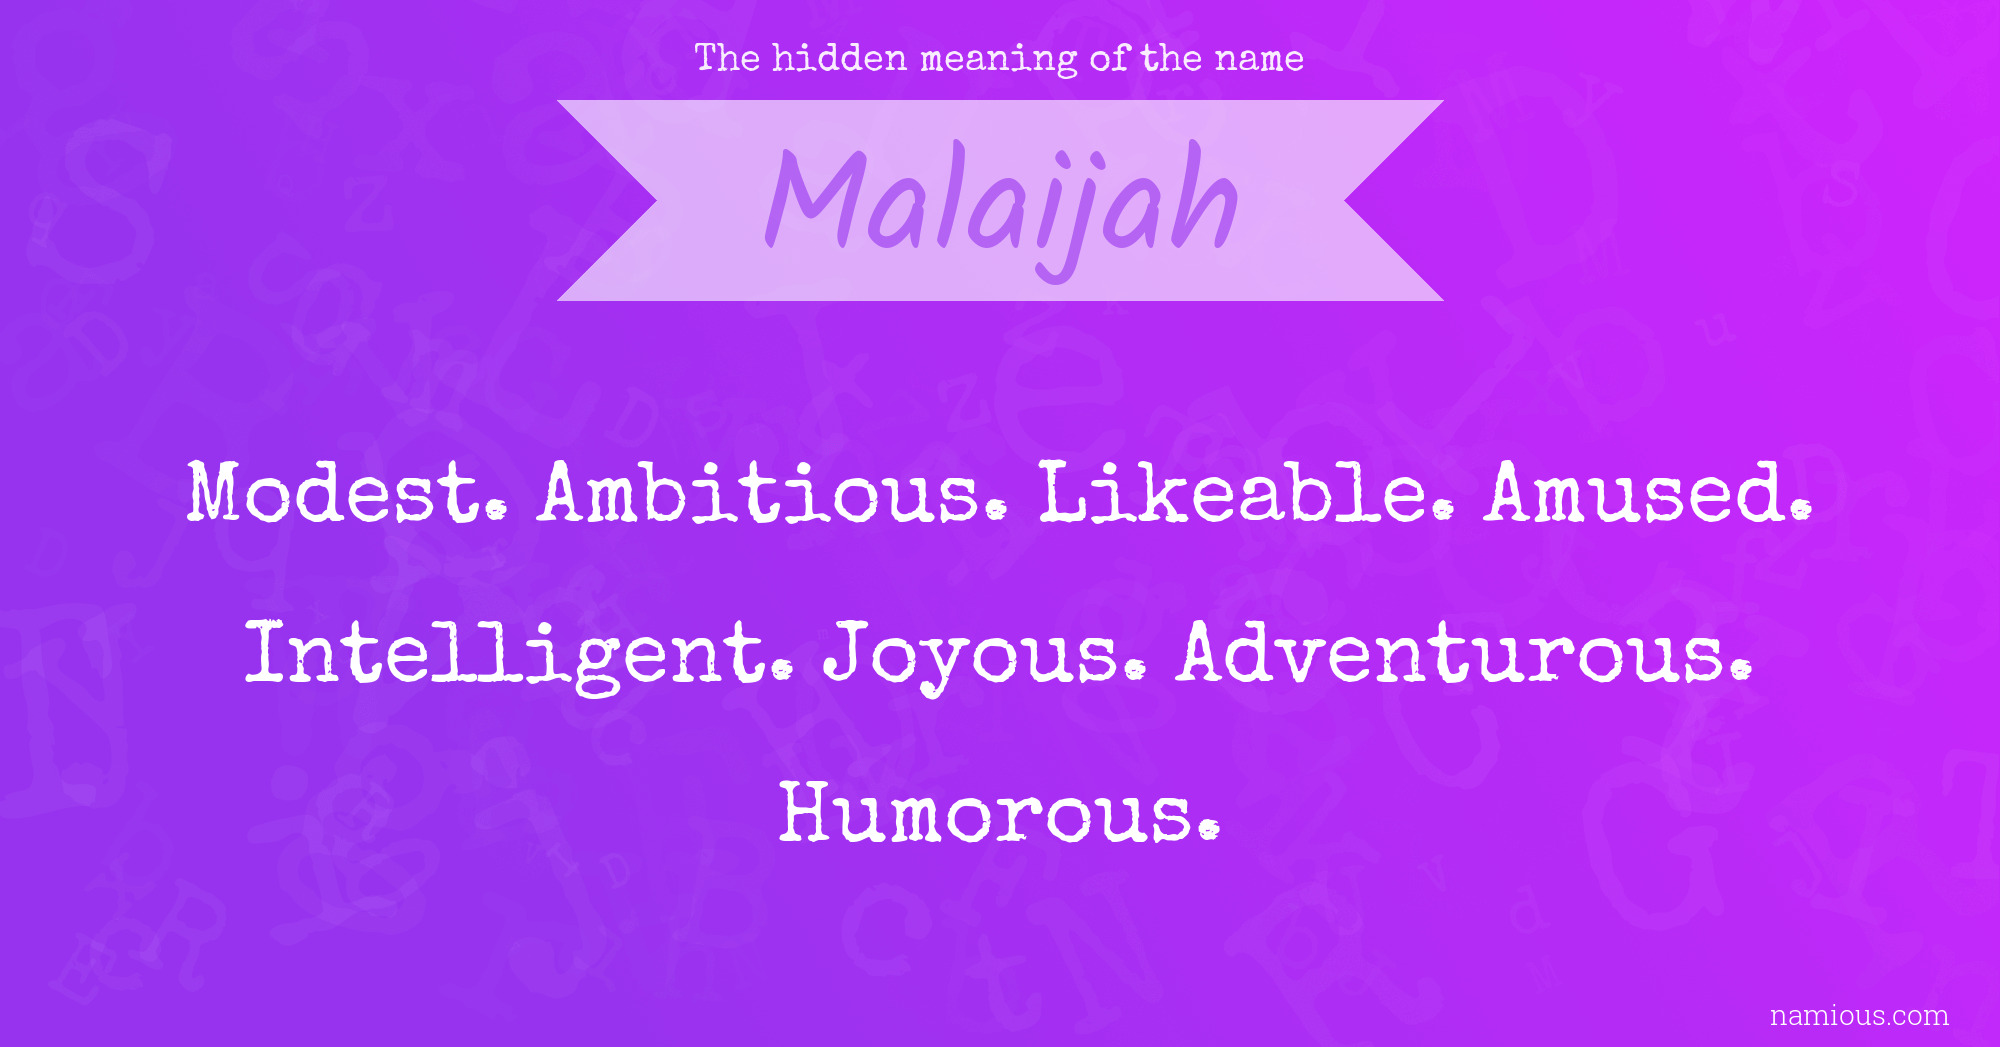 The hidden meaning of the name Malaijah